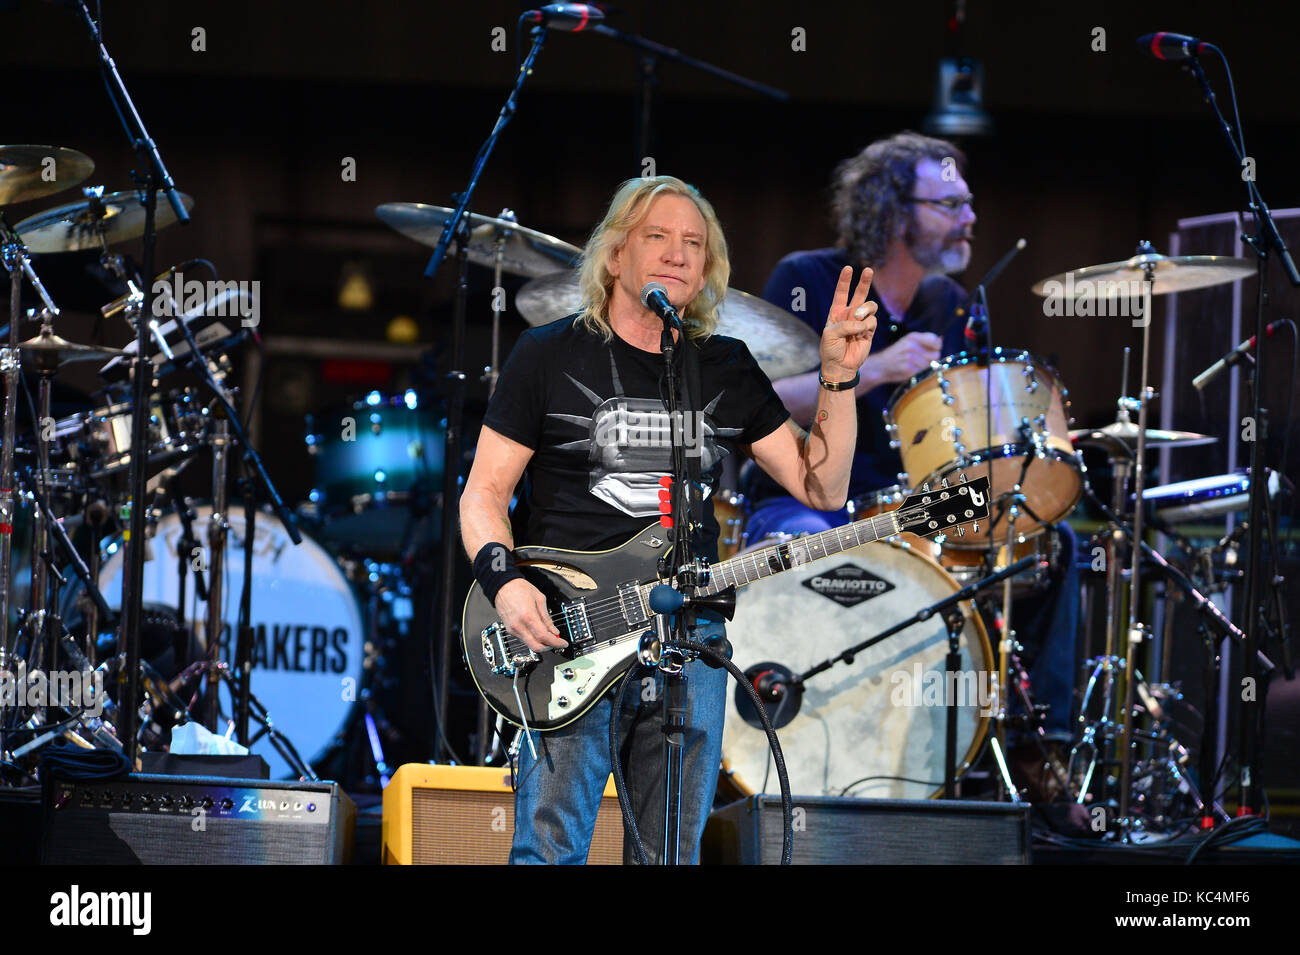 West Palm Beach, FL, USA. 05th May, 2017. Joe Walsh performs during Tom Petty and the Heartbreakers 40th anniversary tour at The Perfect Vodka Amphitheater on May 05, 2017 in West Palm Beach Florida. Credit: Mpi10/Media Punch/Alamy Live News Stock Photo